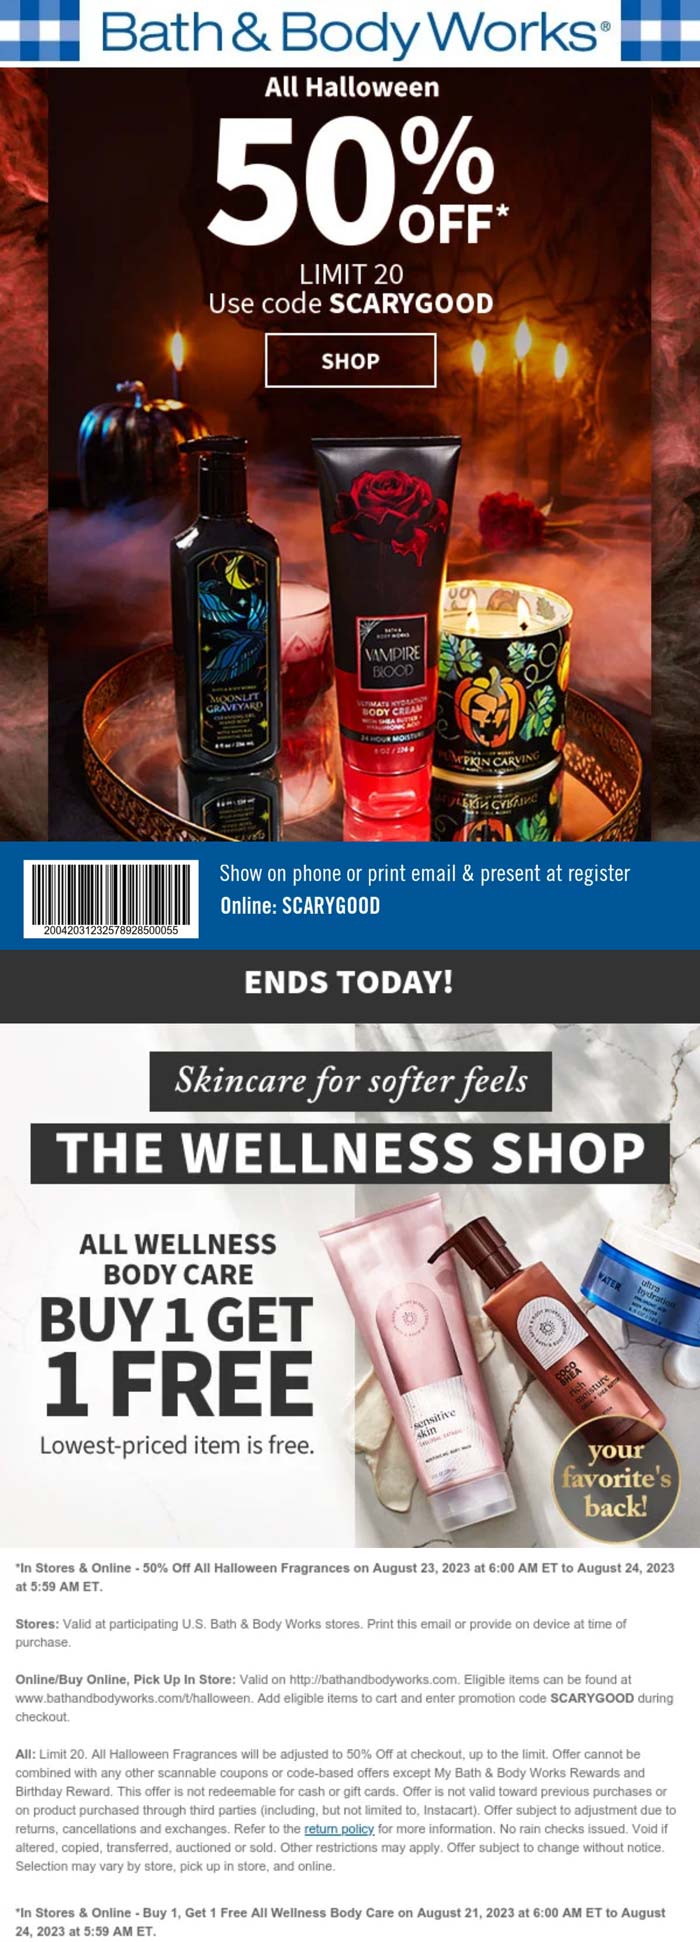 Bath & Body Works stores Coupon  50% off Halloween & second wellness item free today at Bath & Body Works, or online via promo code SCARYGOOD #bathbodyworks 